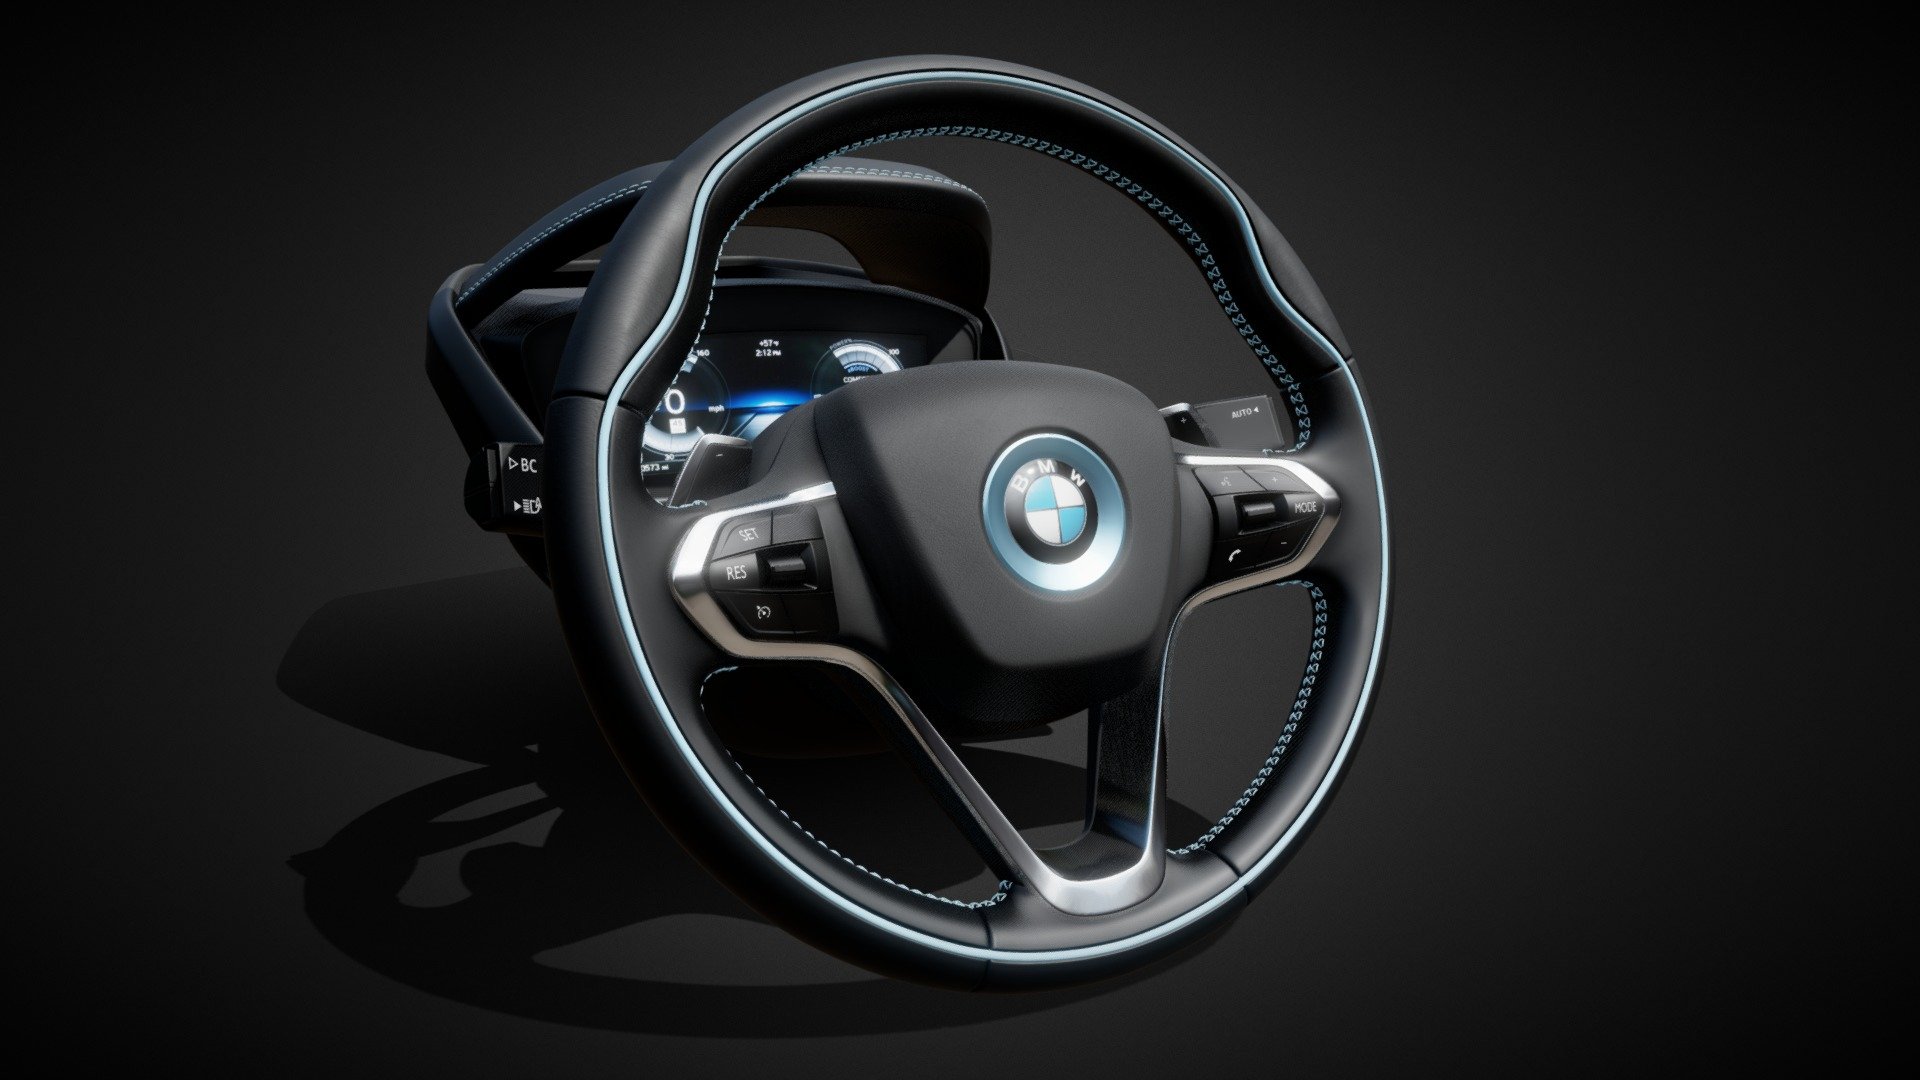 Hi, I modeled for you a steering wheel from a 2015 BMW i8. The model is very detailed and is primarily done in blender 3d model